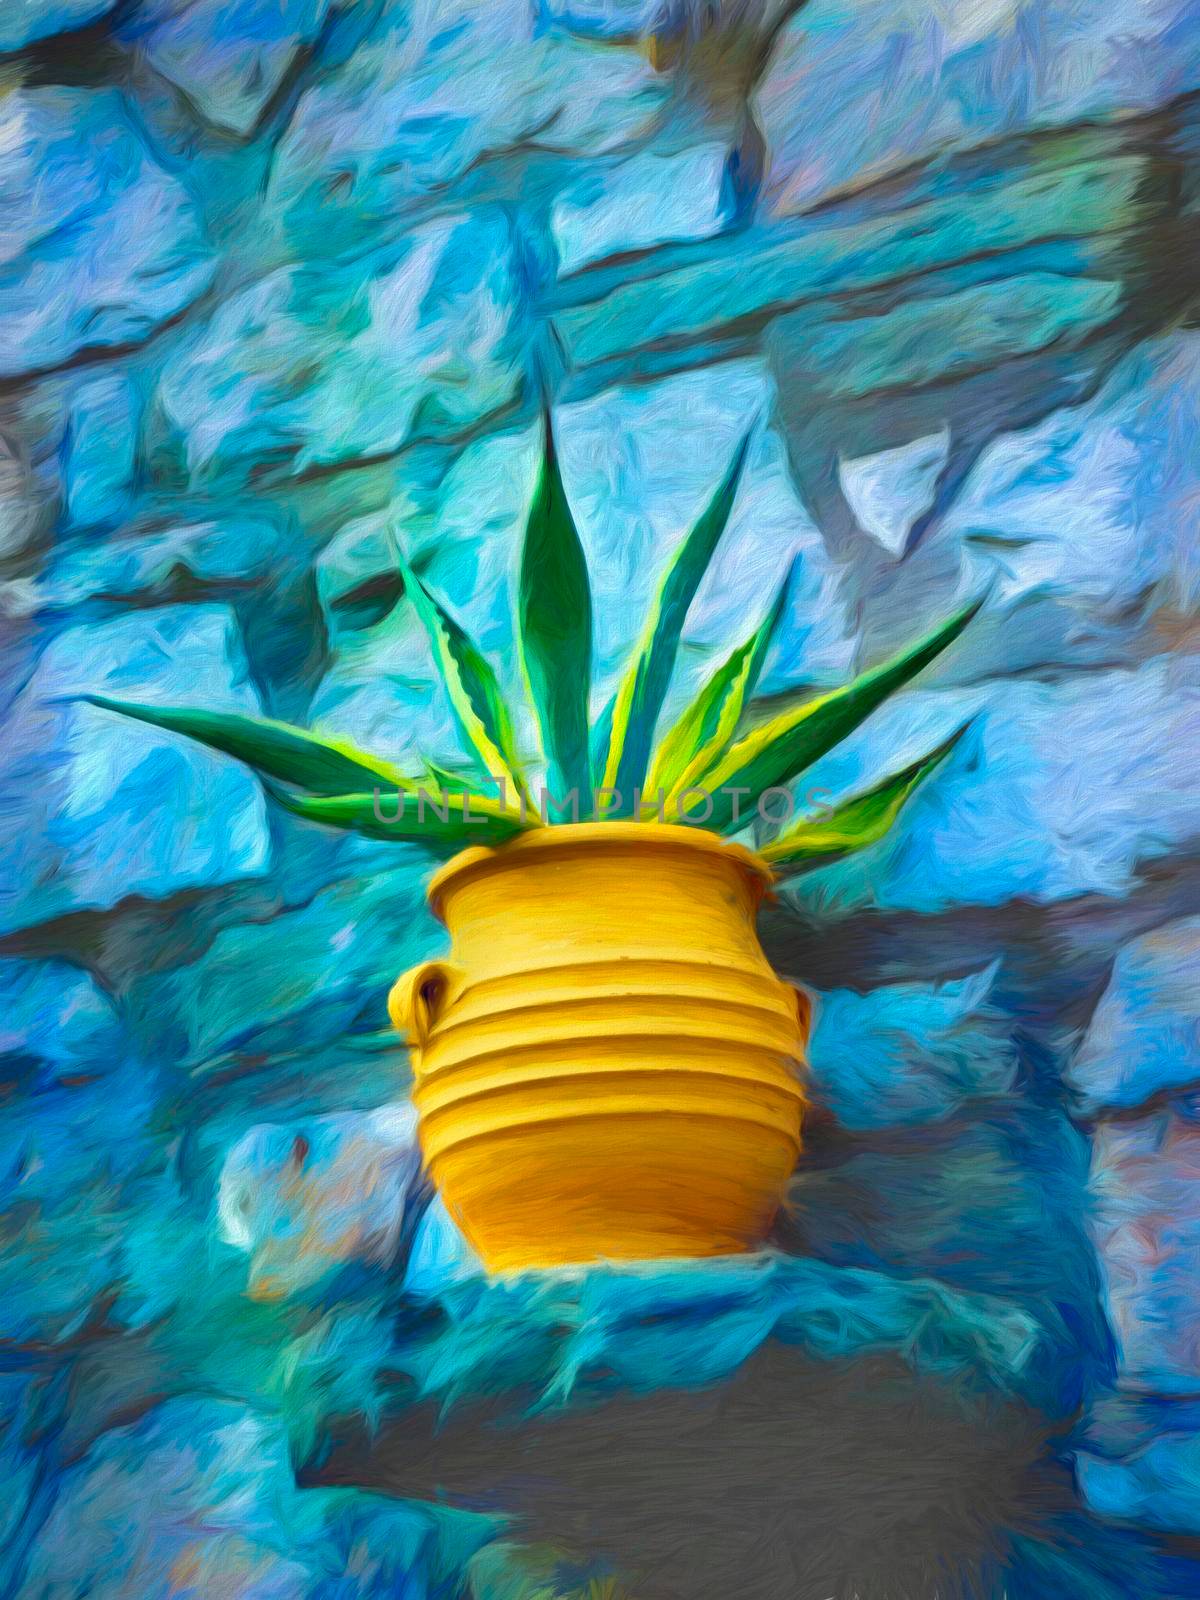 Digital painting of a yellow-green flower in a jar with blue background by ankarb